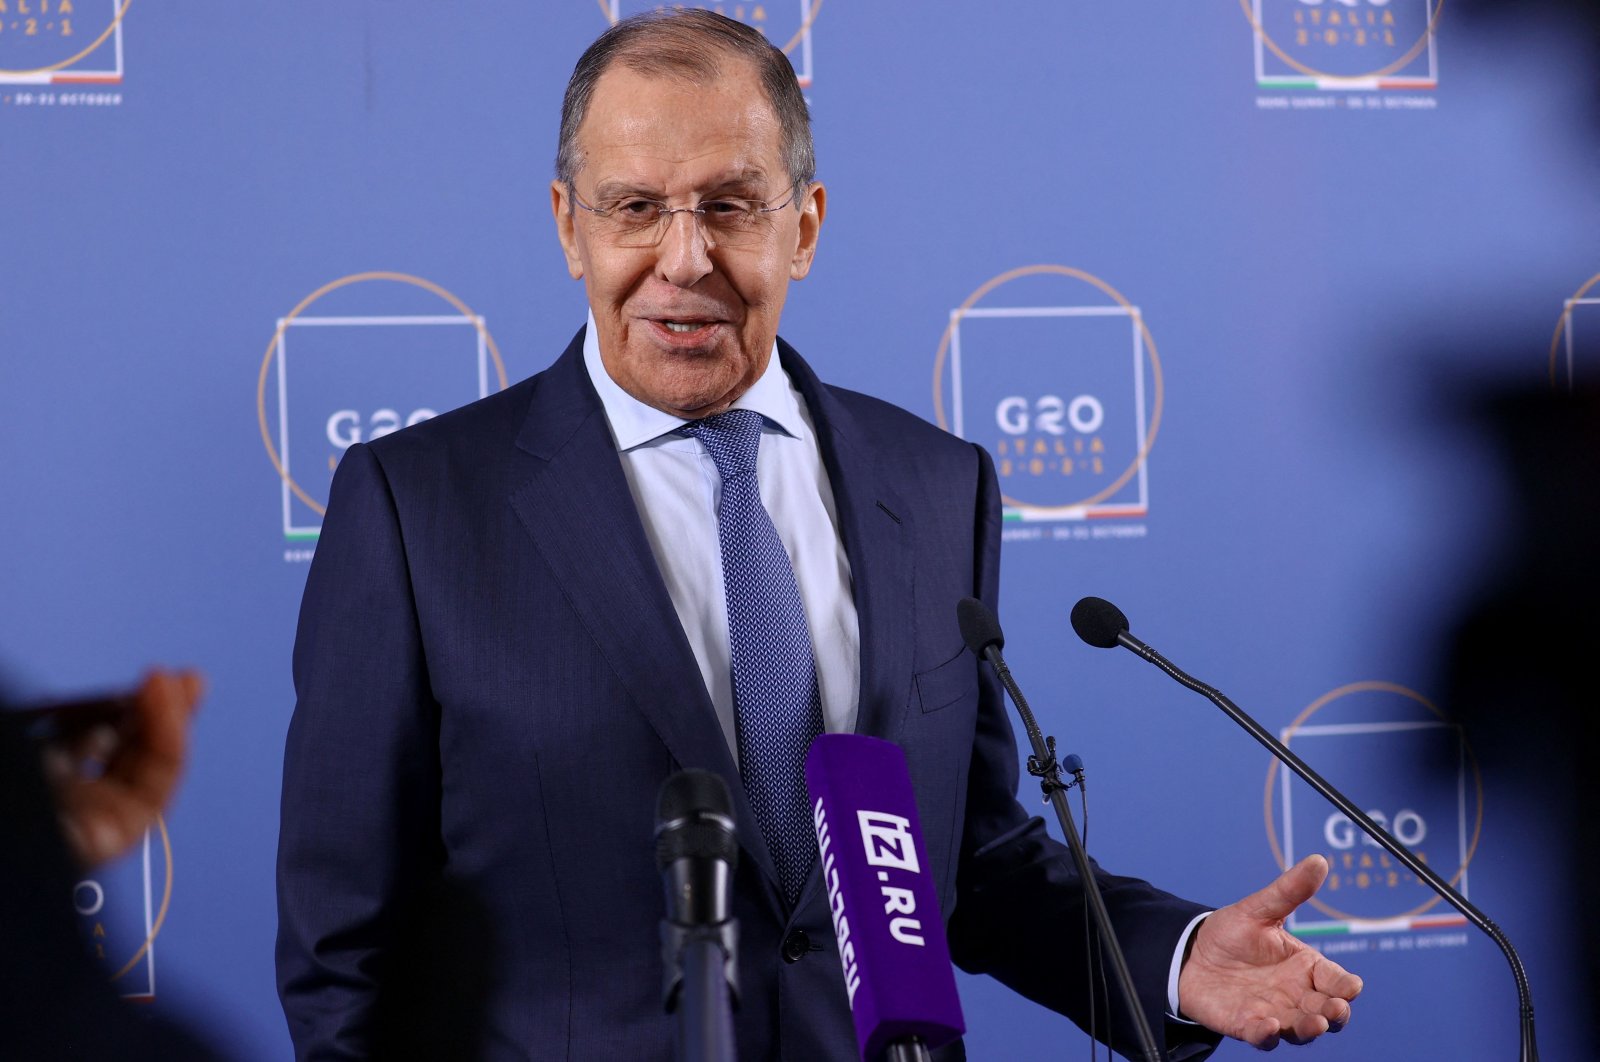 Russian Foreign Minister Sergey Lavrov speaks with the media during the G-20 summit in Rome, Italy, Oct. 31, 2021. (AFP Photo)